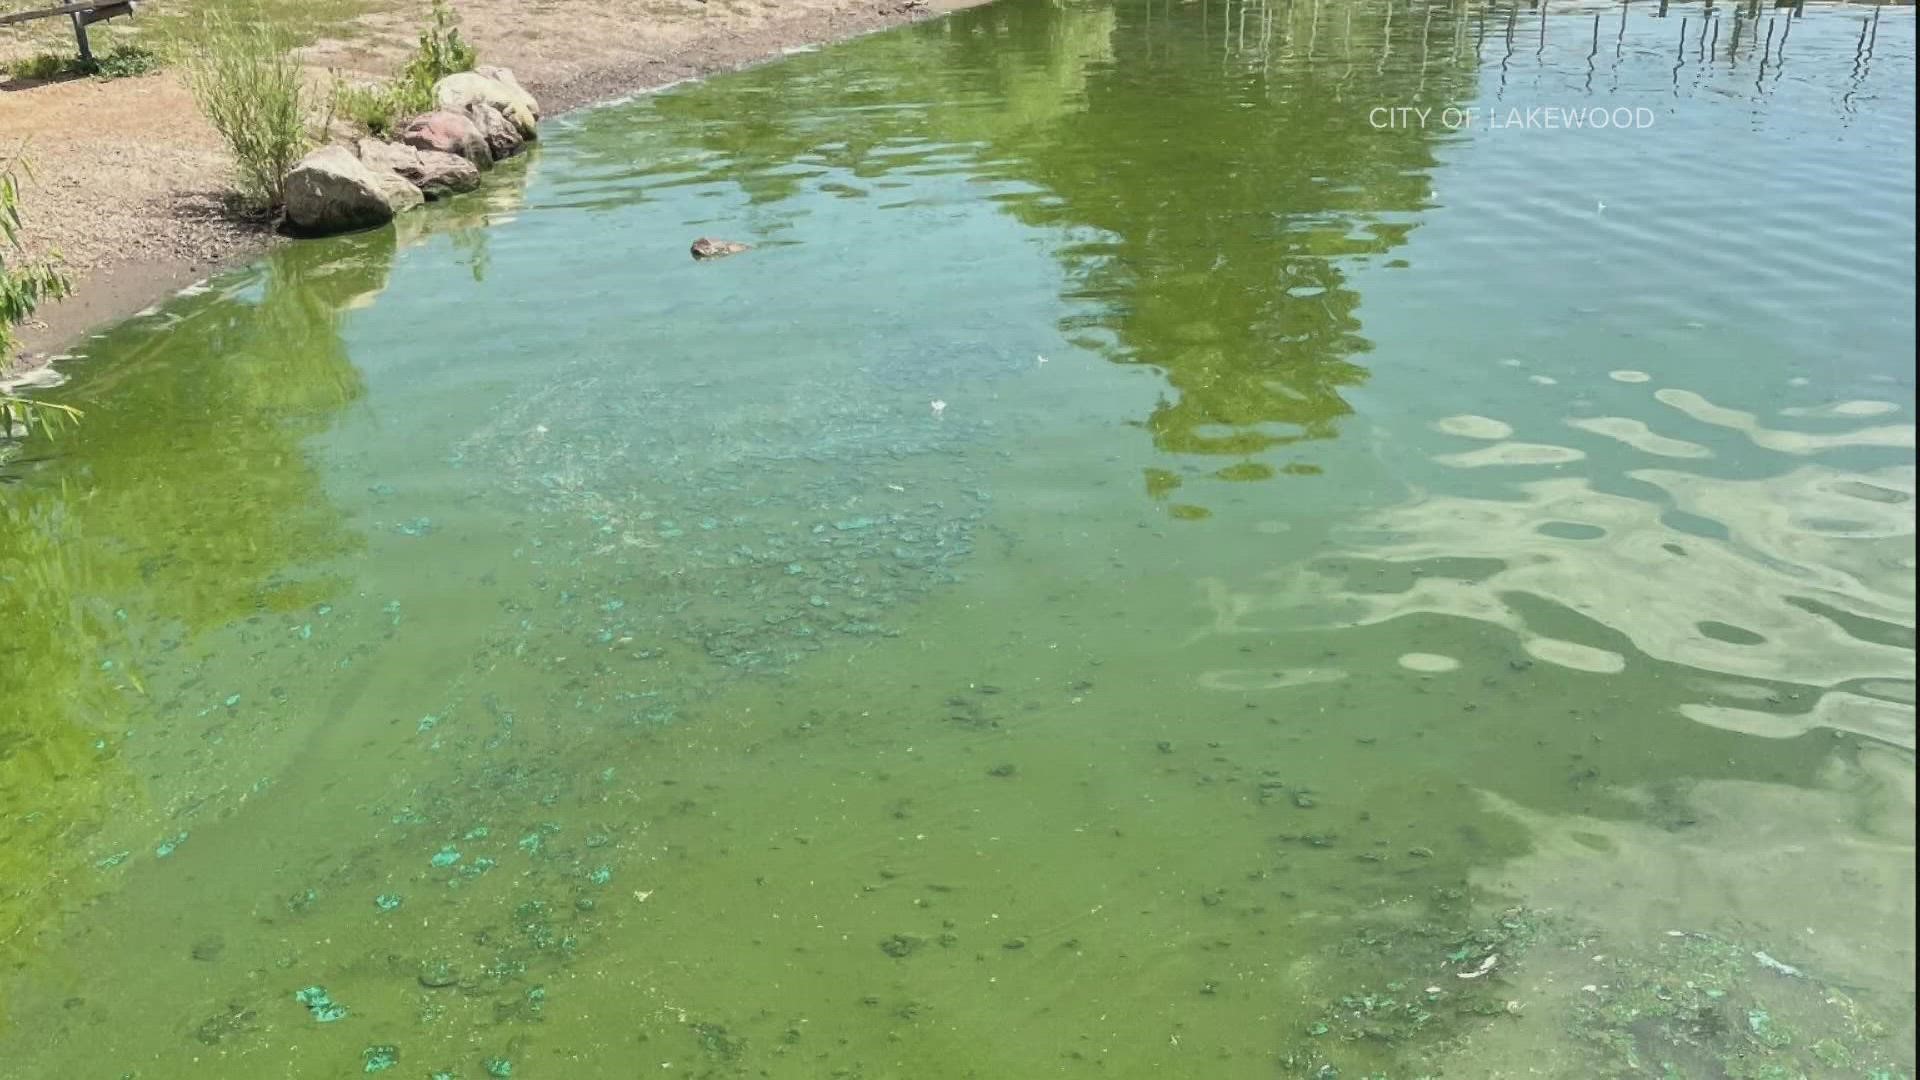 Colorado Parks and Wildlife said the lake is experiencing an algae bloom that is depleting oxygen and killing fish.